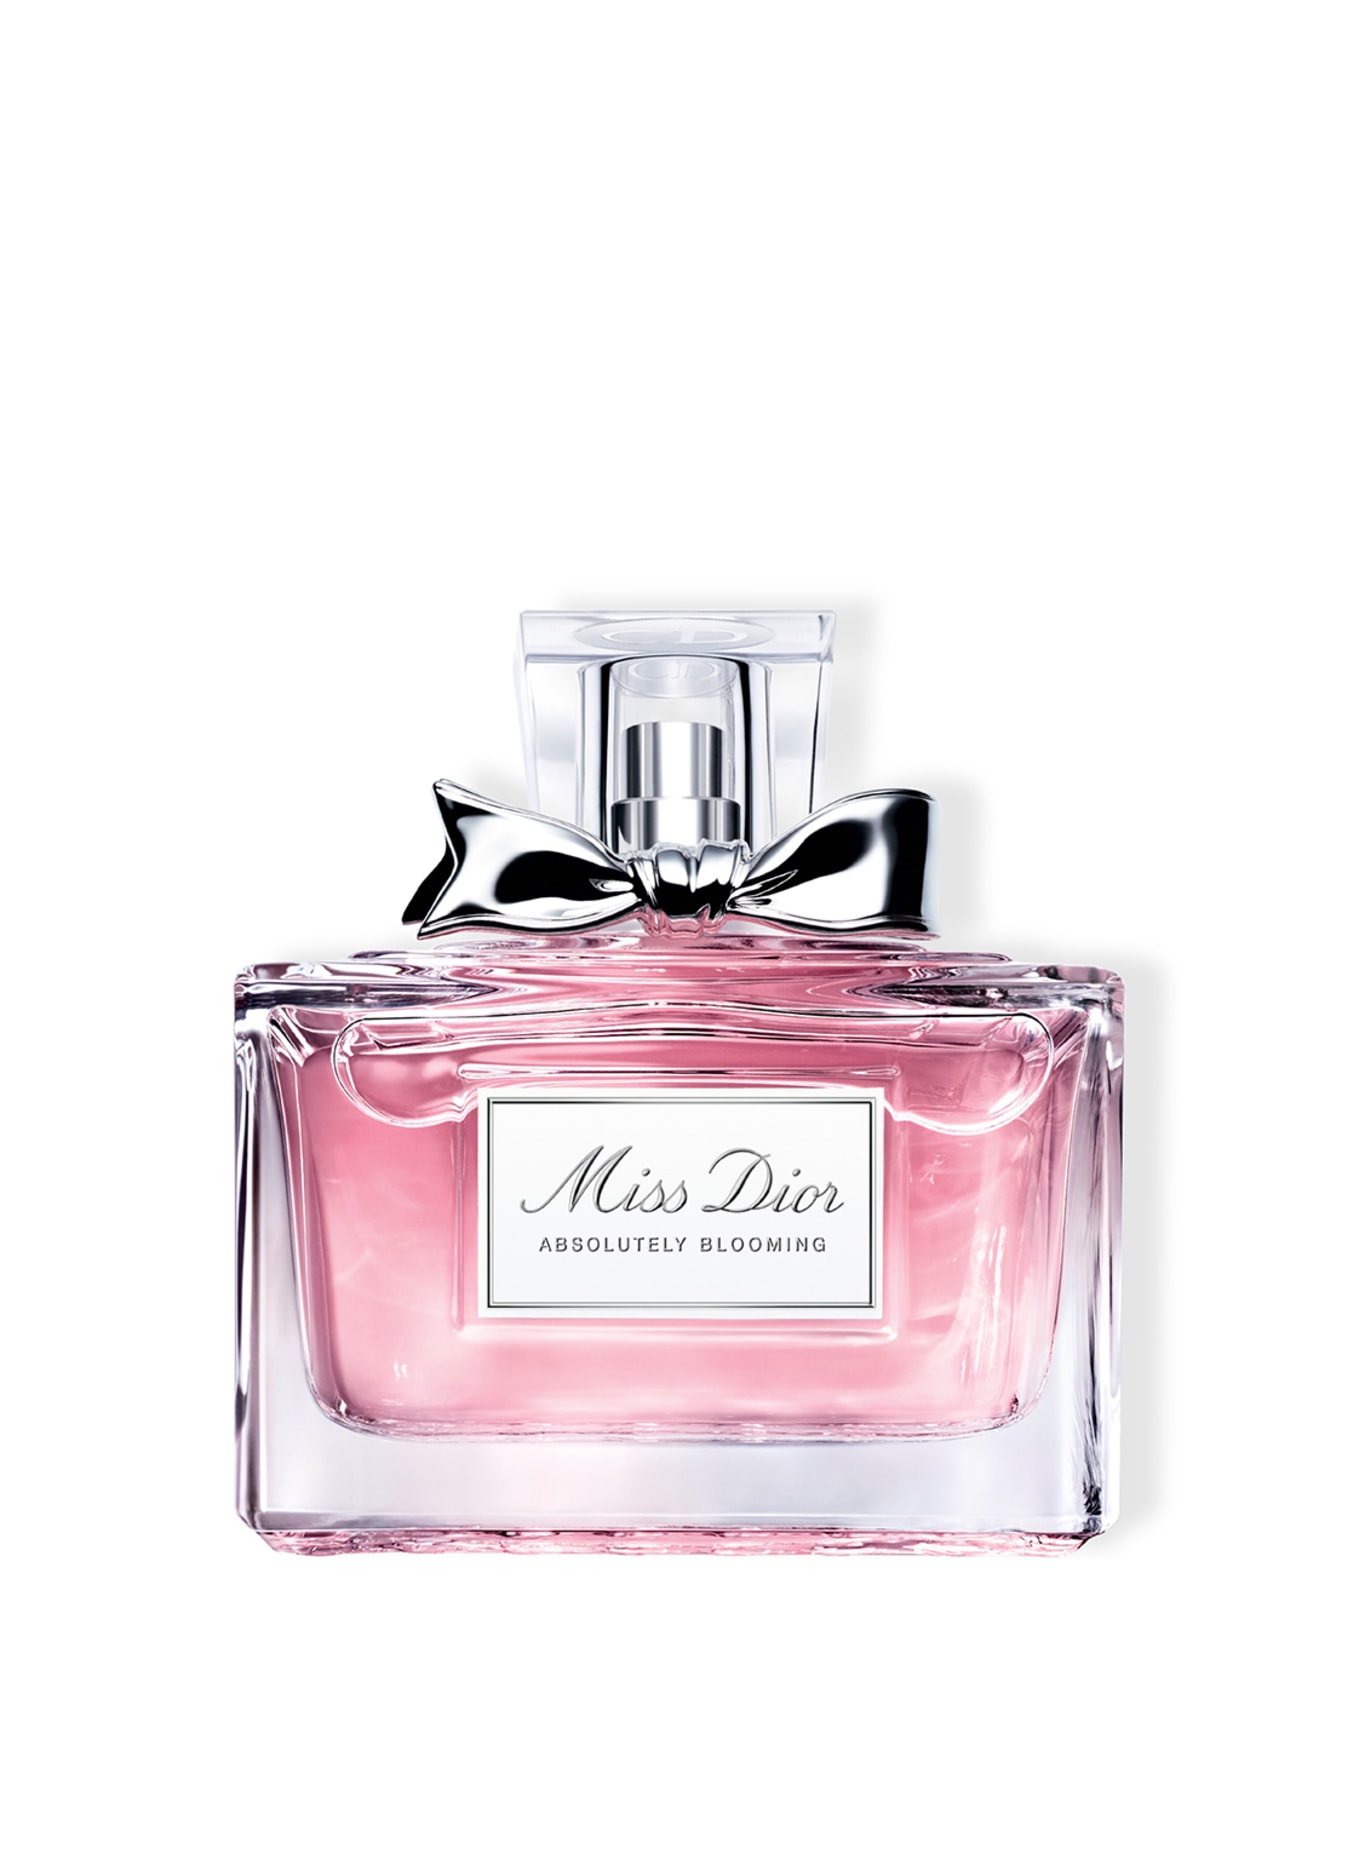 DIOR MISS DIOR ABSOLUTELY BLOOMING (Bild 1)